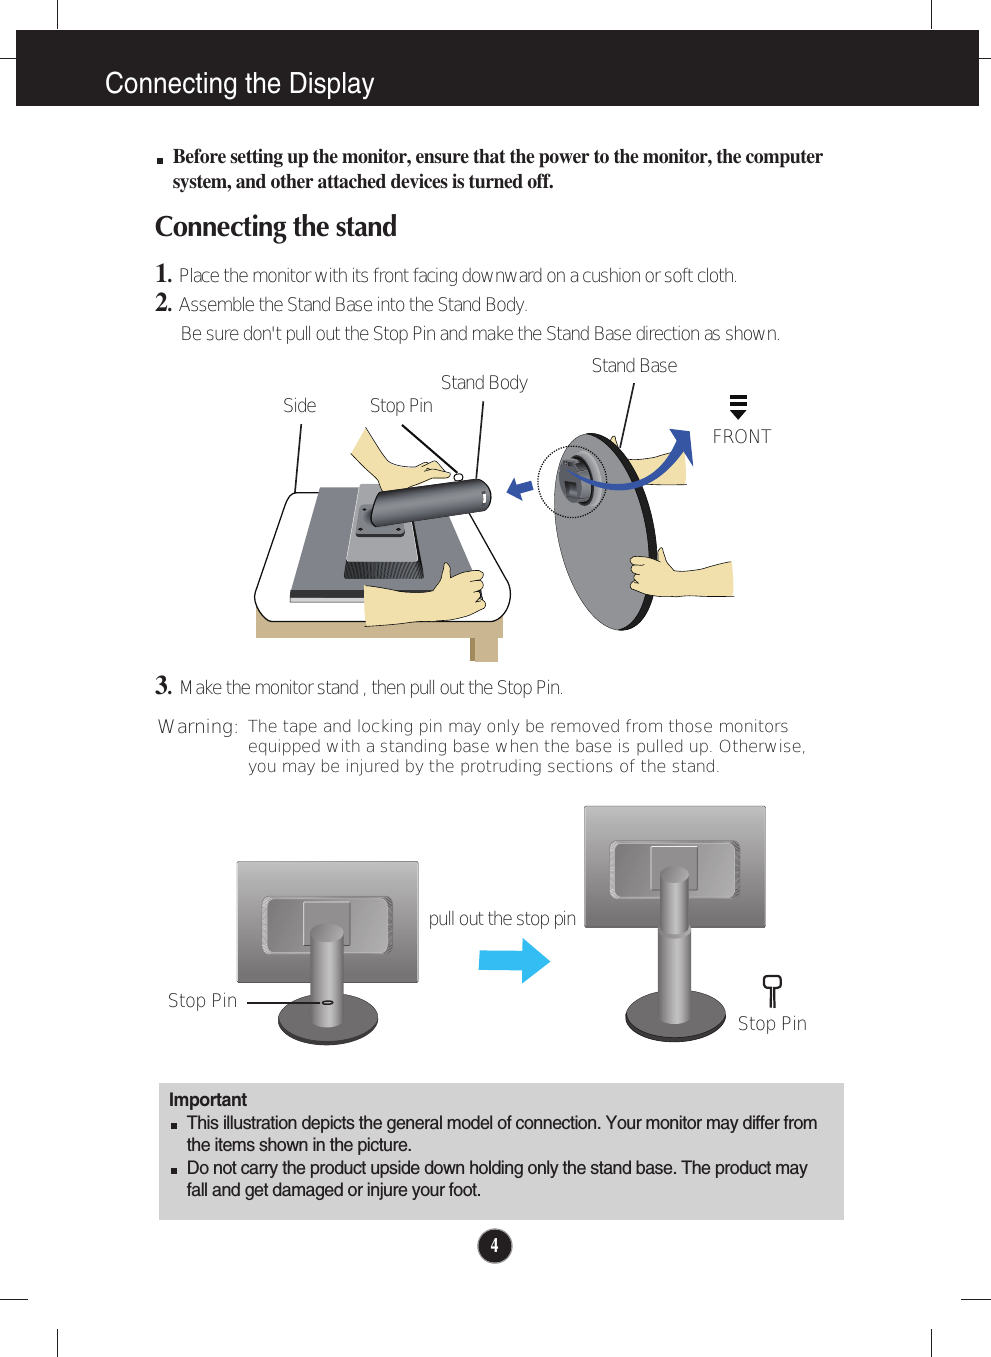 4Connecting the DisplayImportantThis illustration depicts the general model of connection. Your monitor may differ fromthe items shown in the picture.Do not carry the product upside down holding only the stand base. The product mayfall and get damaged or injure your foot.Before setting up the monitor, ensure that the power to the monitor, the computersystem, and other attached devices is turned off.Connecting the stand 1.  Place the monitor with its front facing downward on a cushion or soft cloth.2.Assemble the Stand Base into the Stand Body.Be sure don&apos;t pull out the Stop Pin and make the Stand Base direction as shown. 3.Make the monitor stand , then pull out the Stop Pin.Stand BaseFRONTStand BodyStop PinSideStop Pin Stop Pinpull out the stop pinThe tape and locking pin may only be removed from those monitorsequipped with a standing base when the base is pulled up. Otherwise,you may be injured by the protruding sections of the stand.Warning: